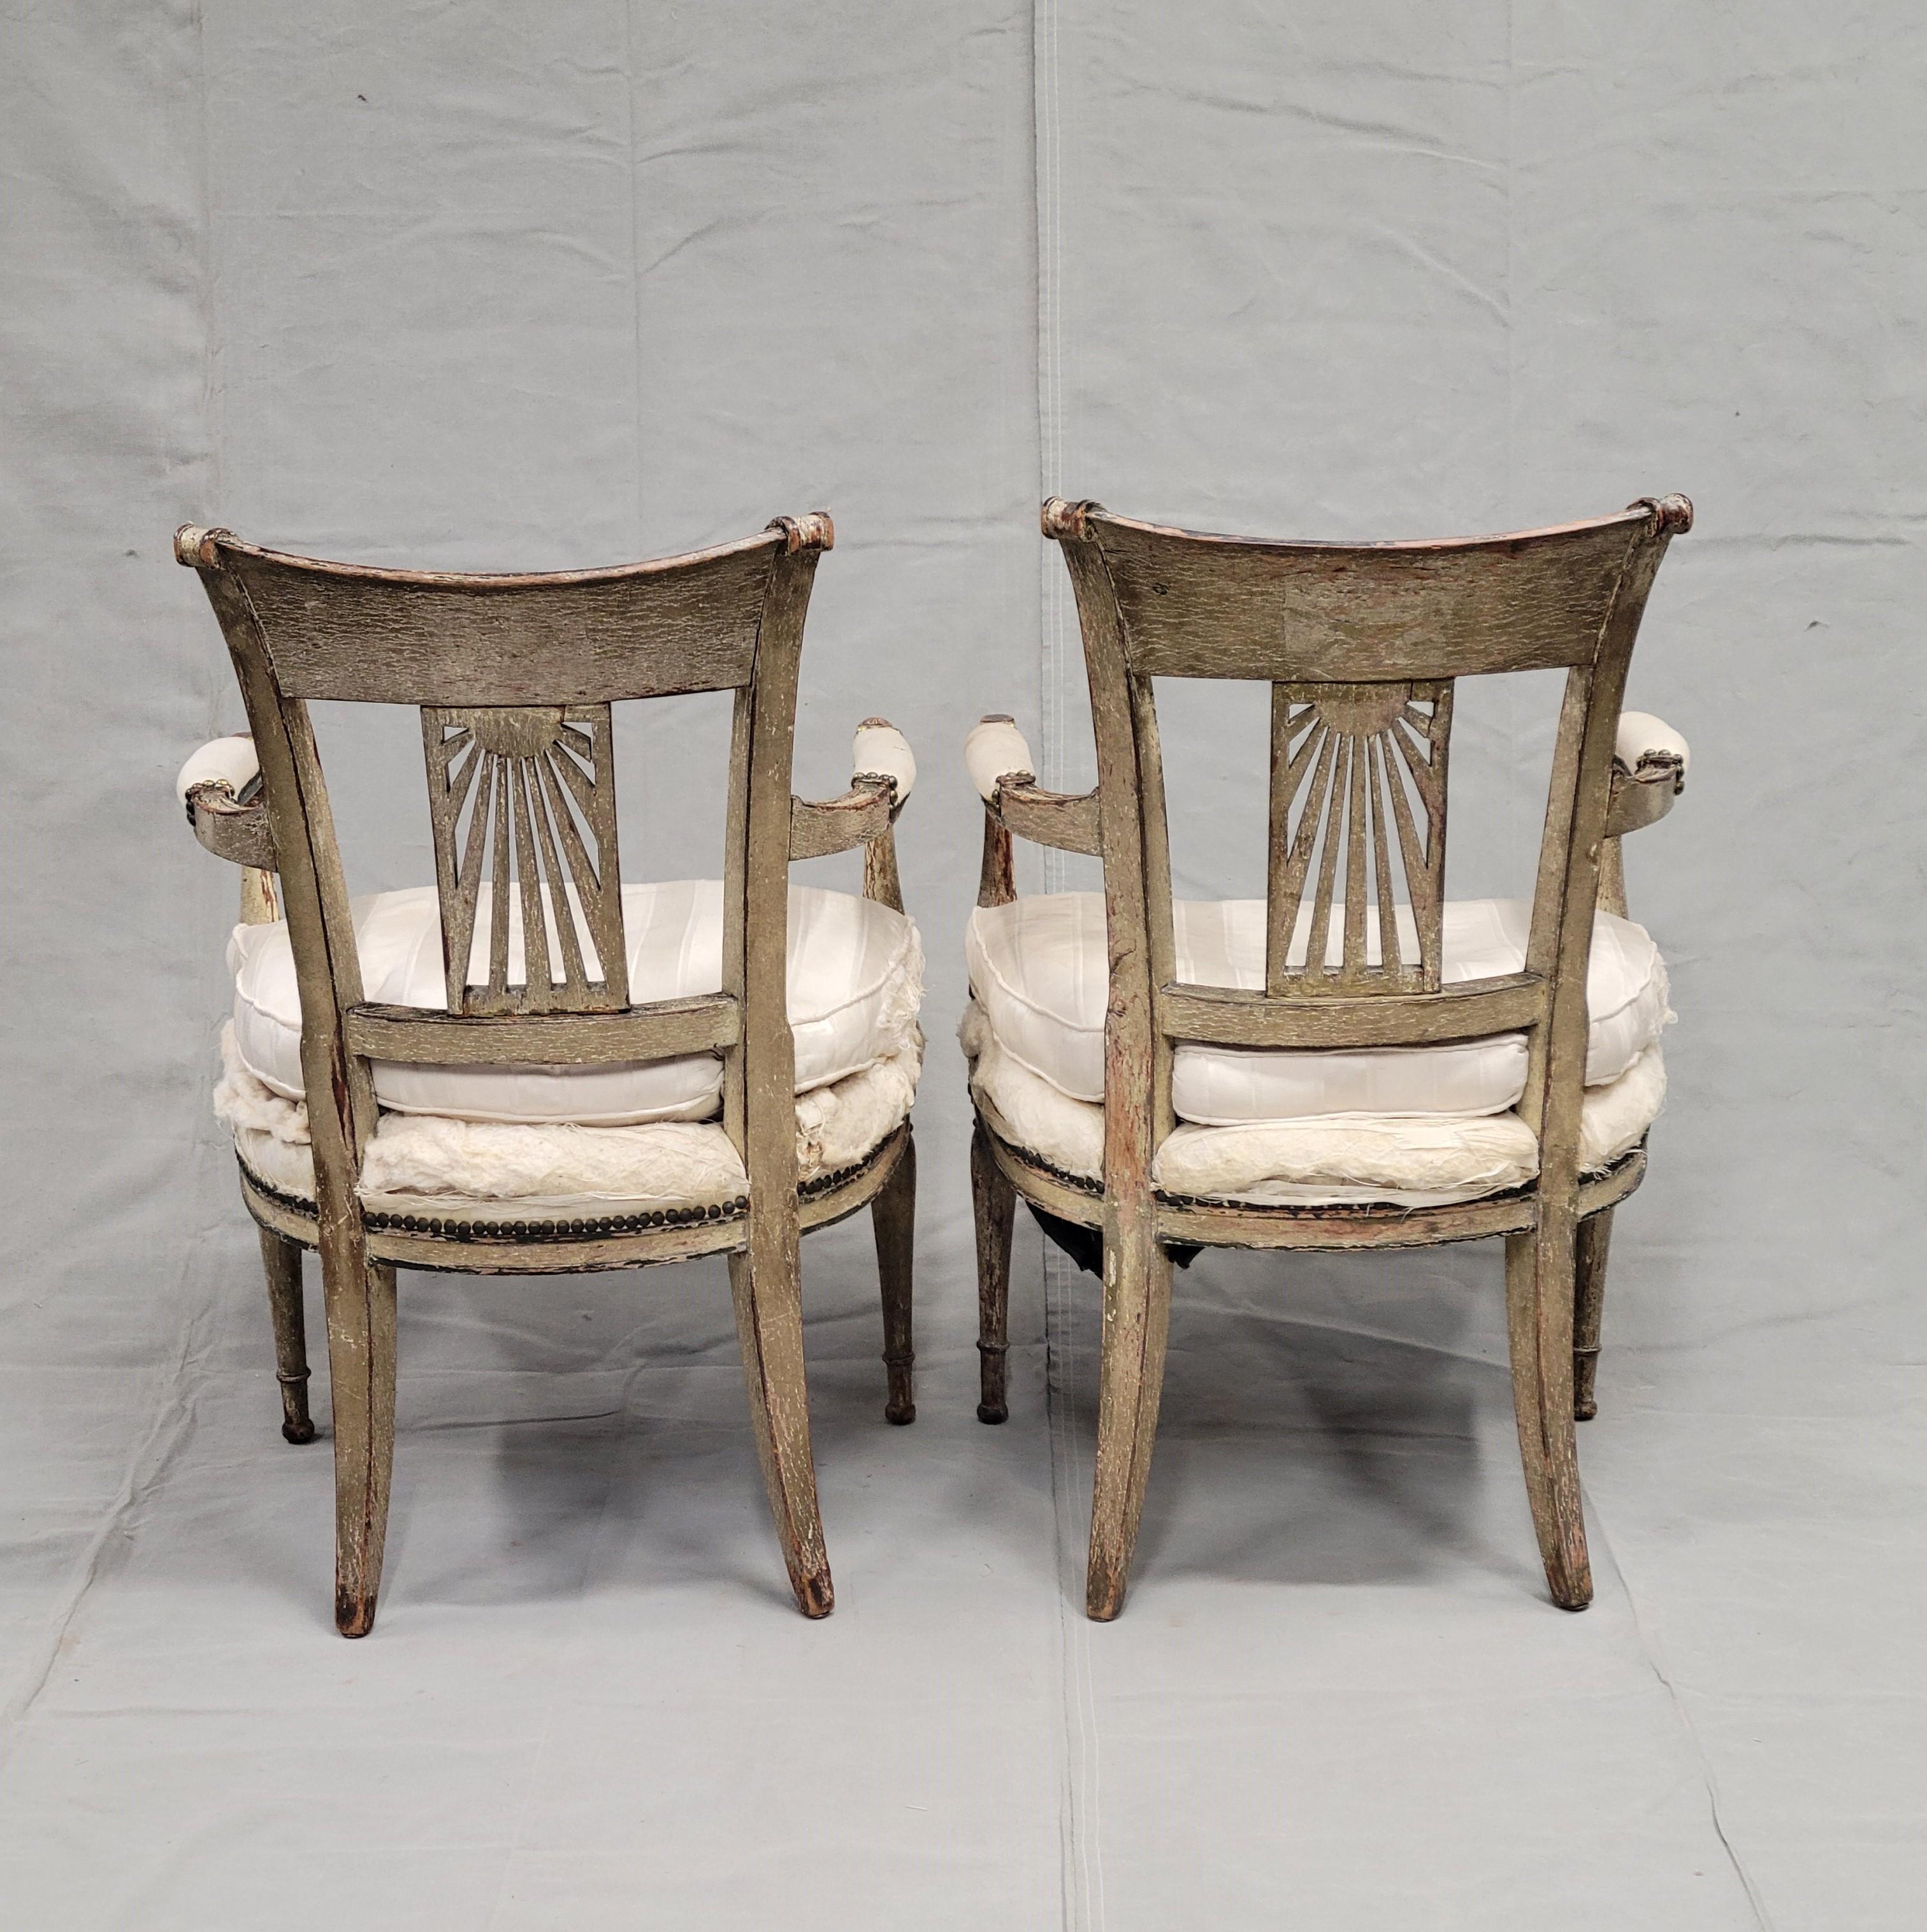 Antique Maison Jansen Style French Louis XVI Painted Fauteuil Chairs - a Pair In Good Condition For Sale In Centennial, CO